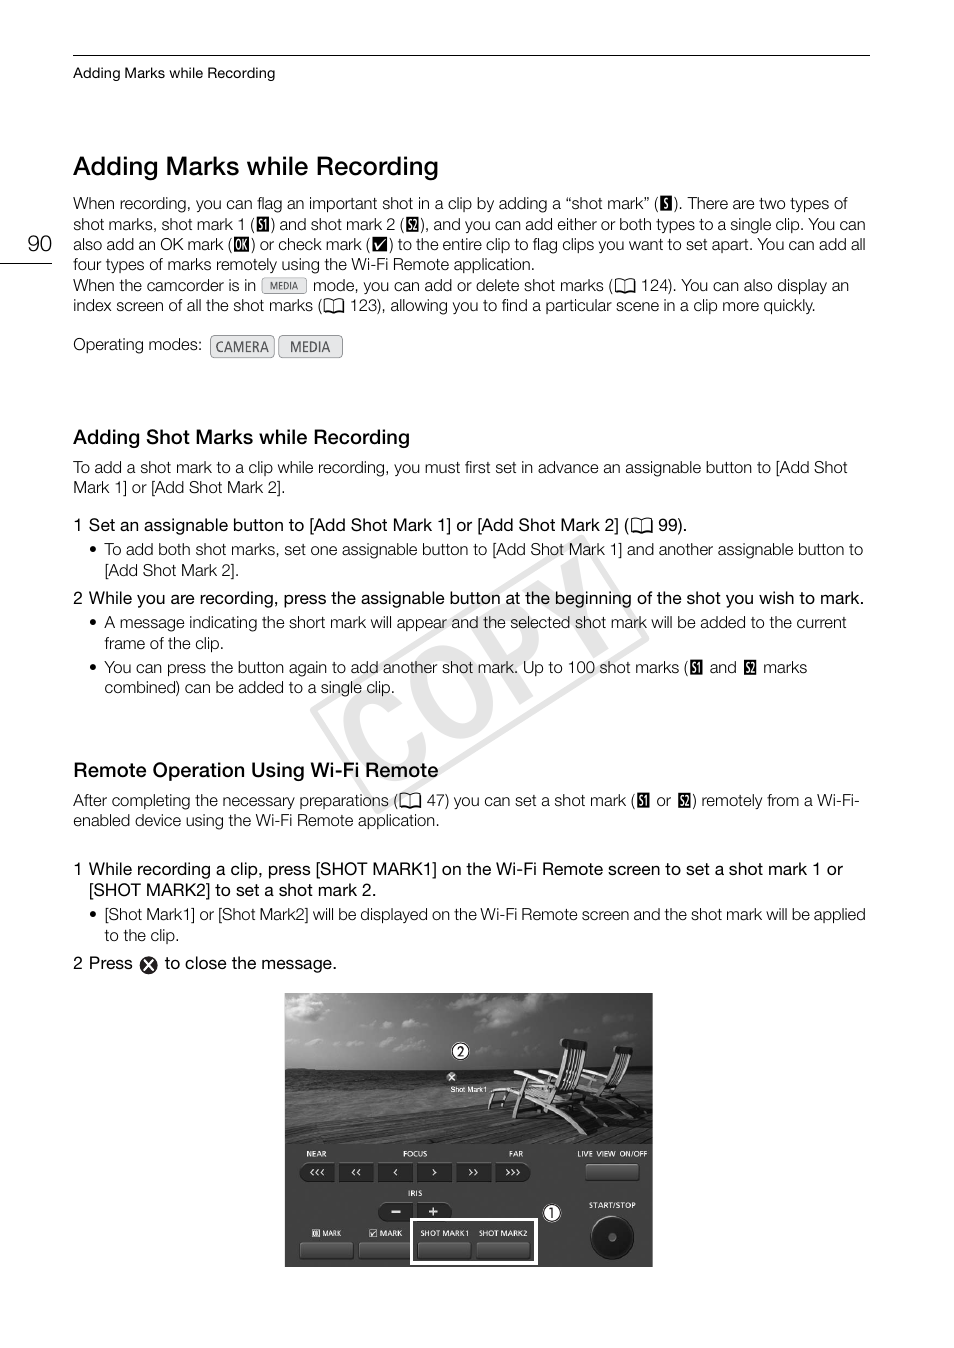 Adding marks while recording 90, Adding shot marks while recording 90, Remote operation using wi-fi remote 90 | Cop y | Canon EOS C300 User Manual | Page 90 / 186